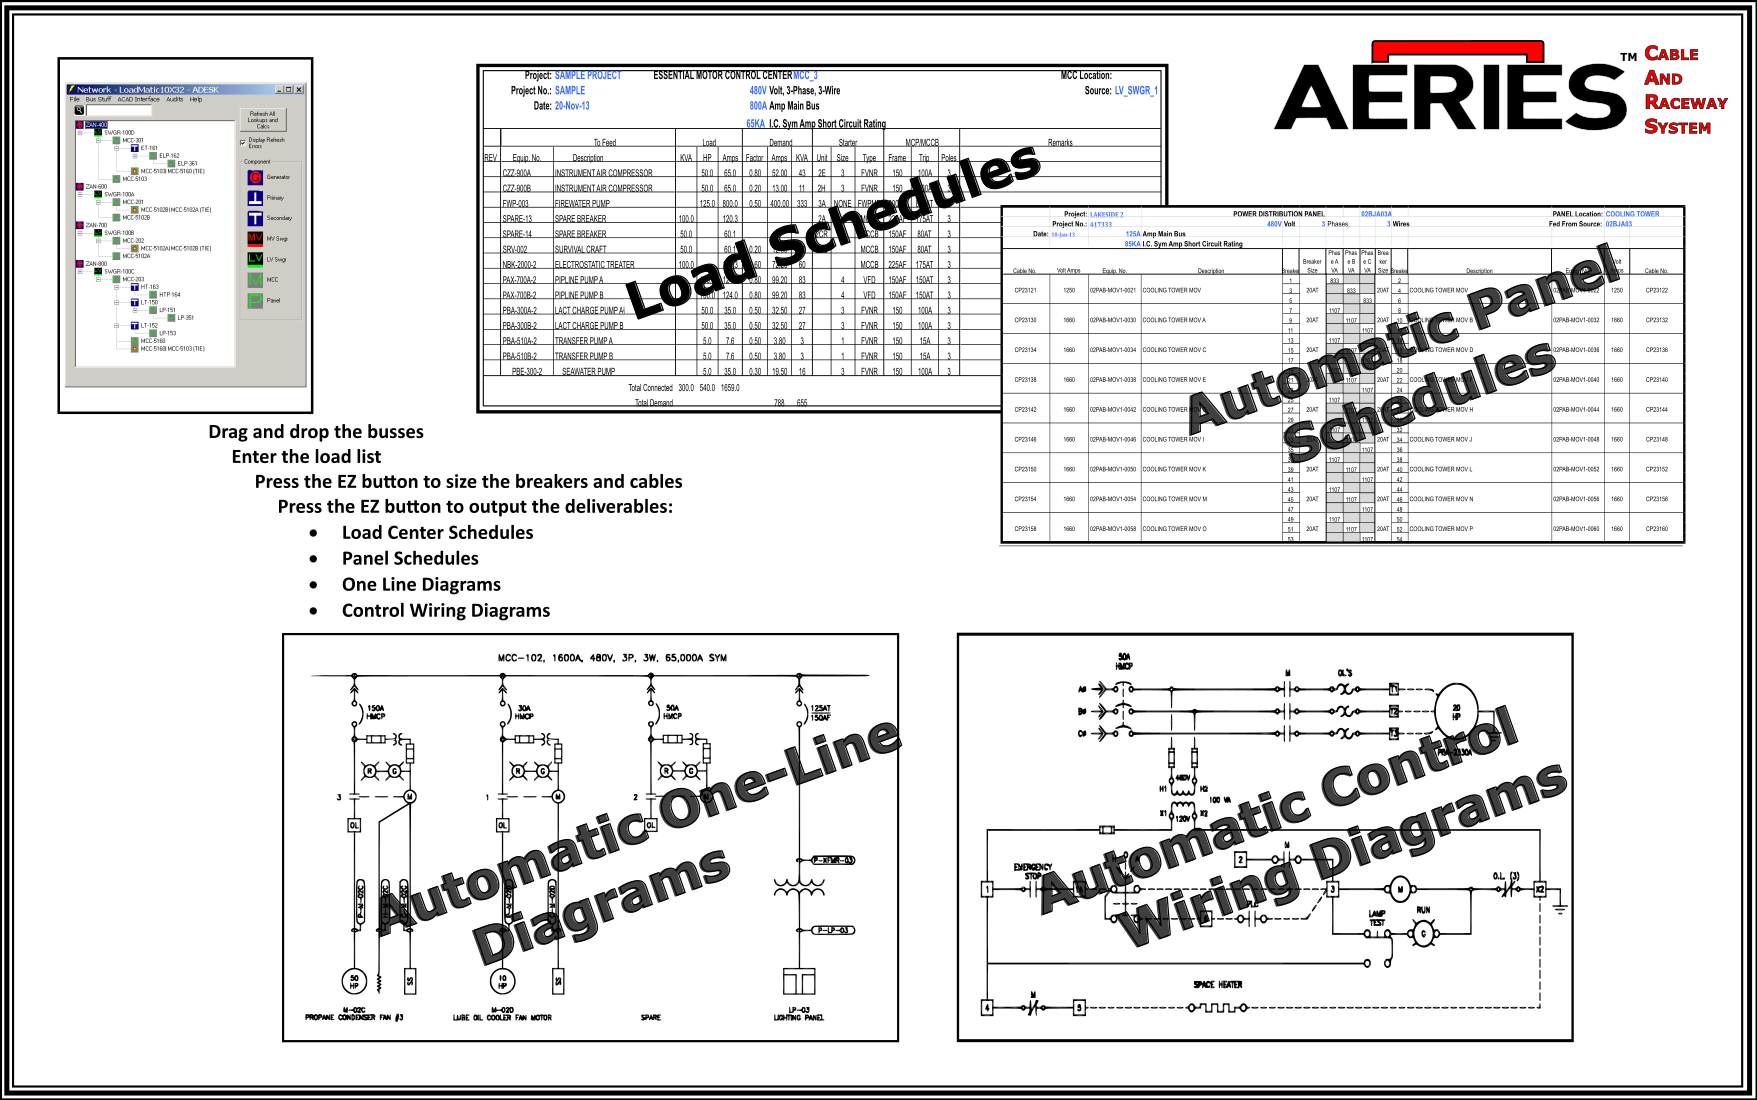 Image depicting deliverables automatically created by the LoadMatic software module including panel and load schedules, one-line diagrams, single line diagrams, and control wiring schematics.